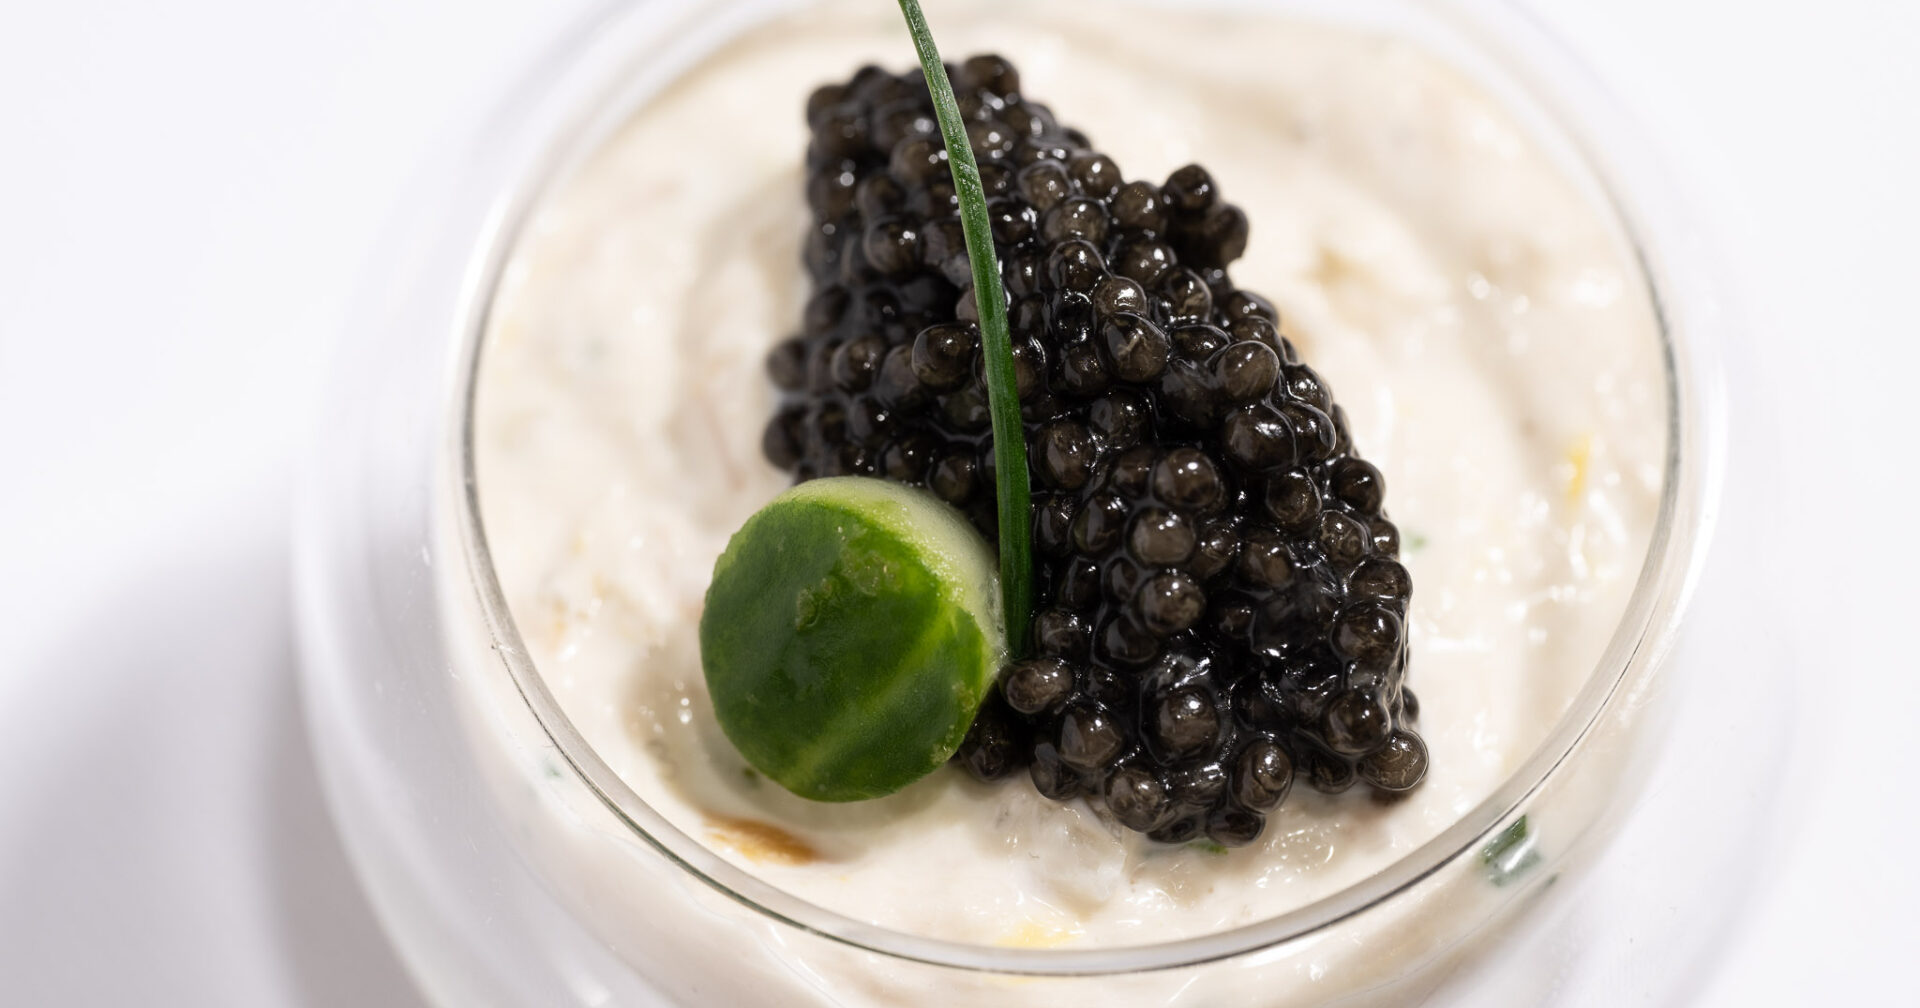 Smoked Sturgeon and Caviar with Cucumbers and Chives in a small glass dish